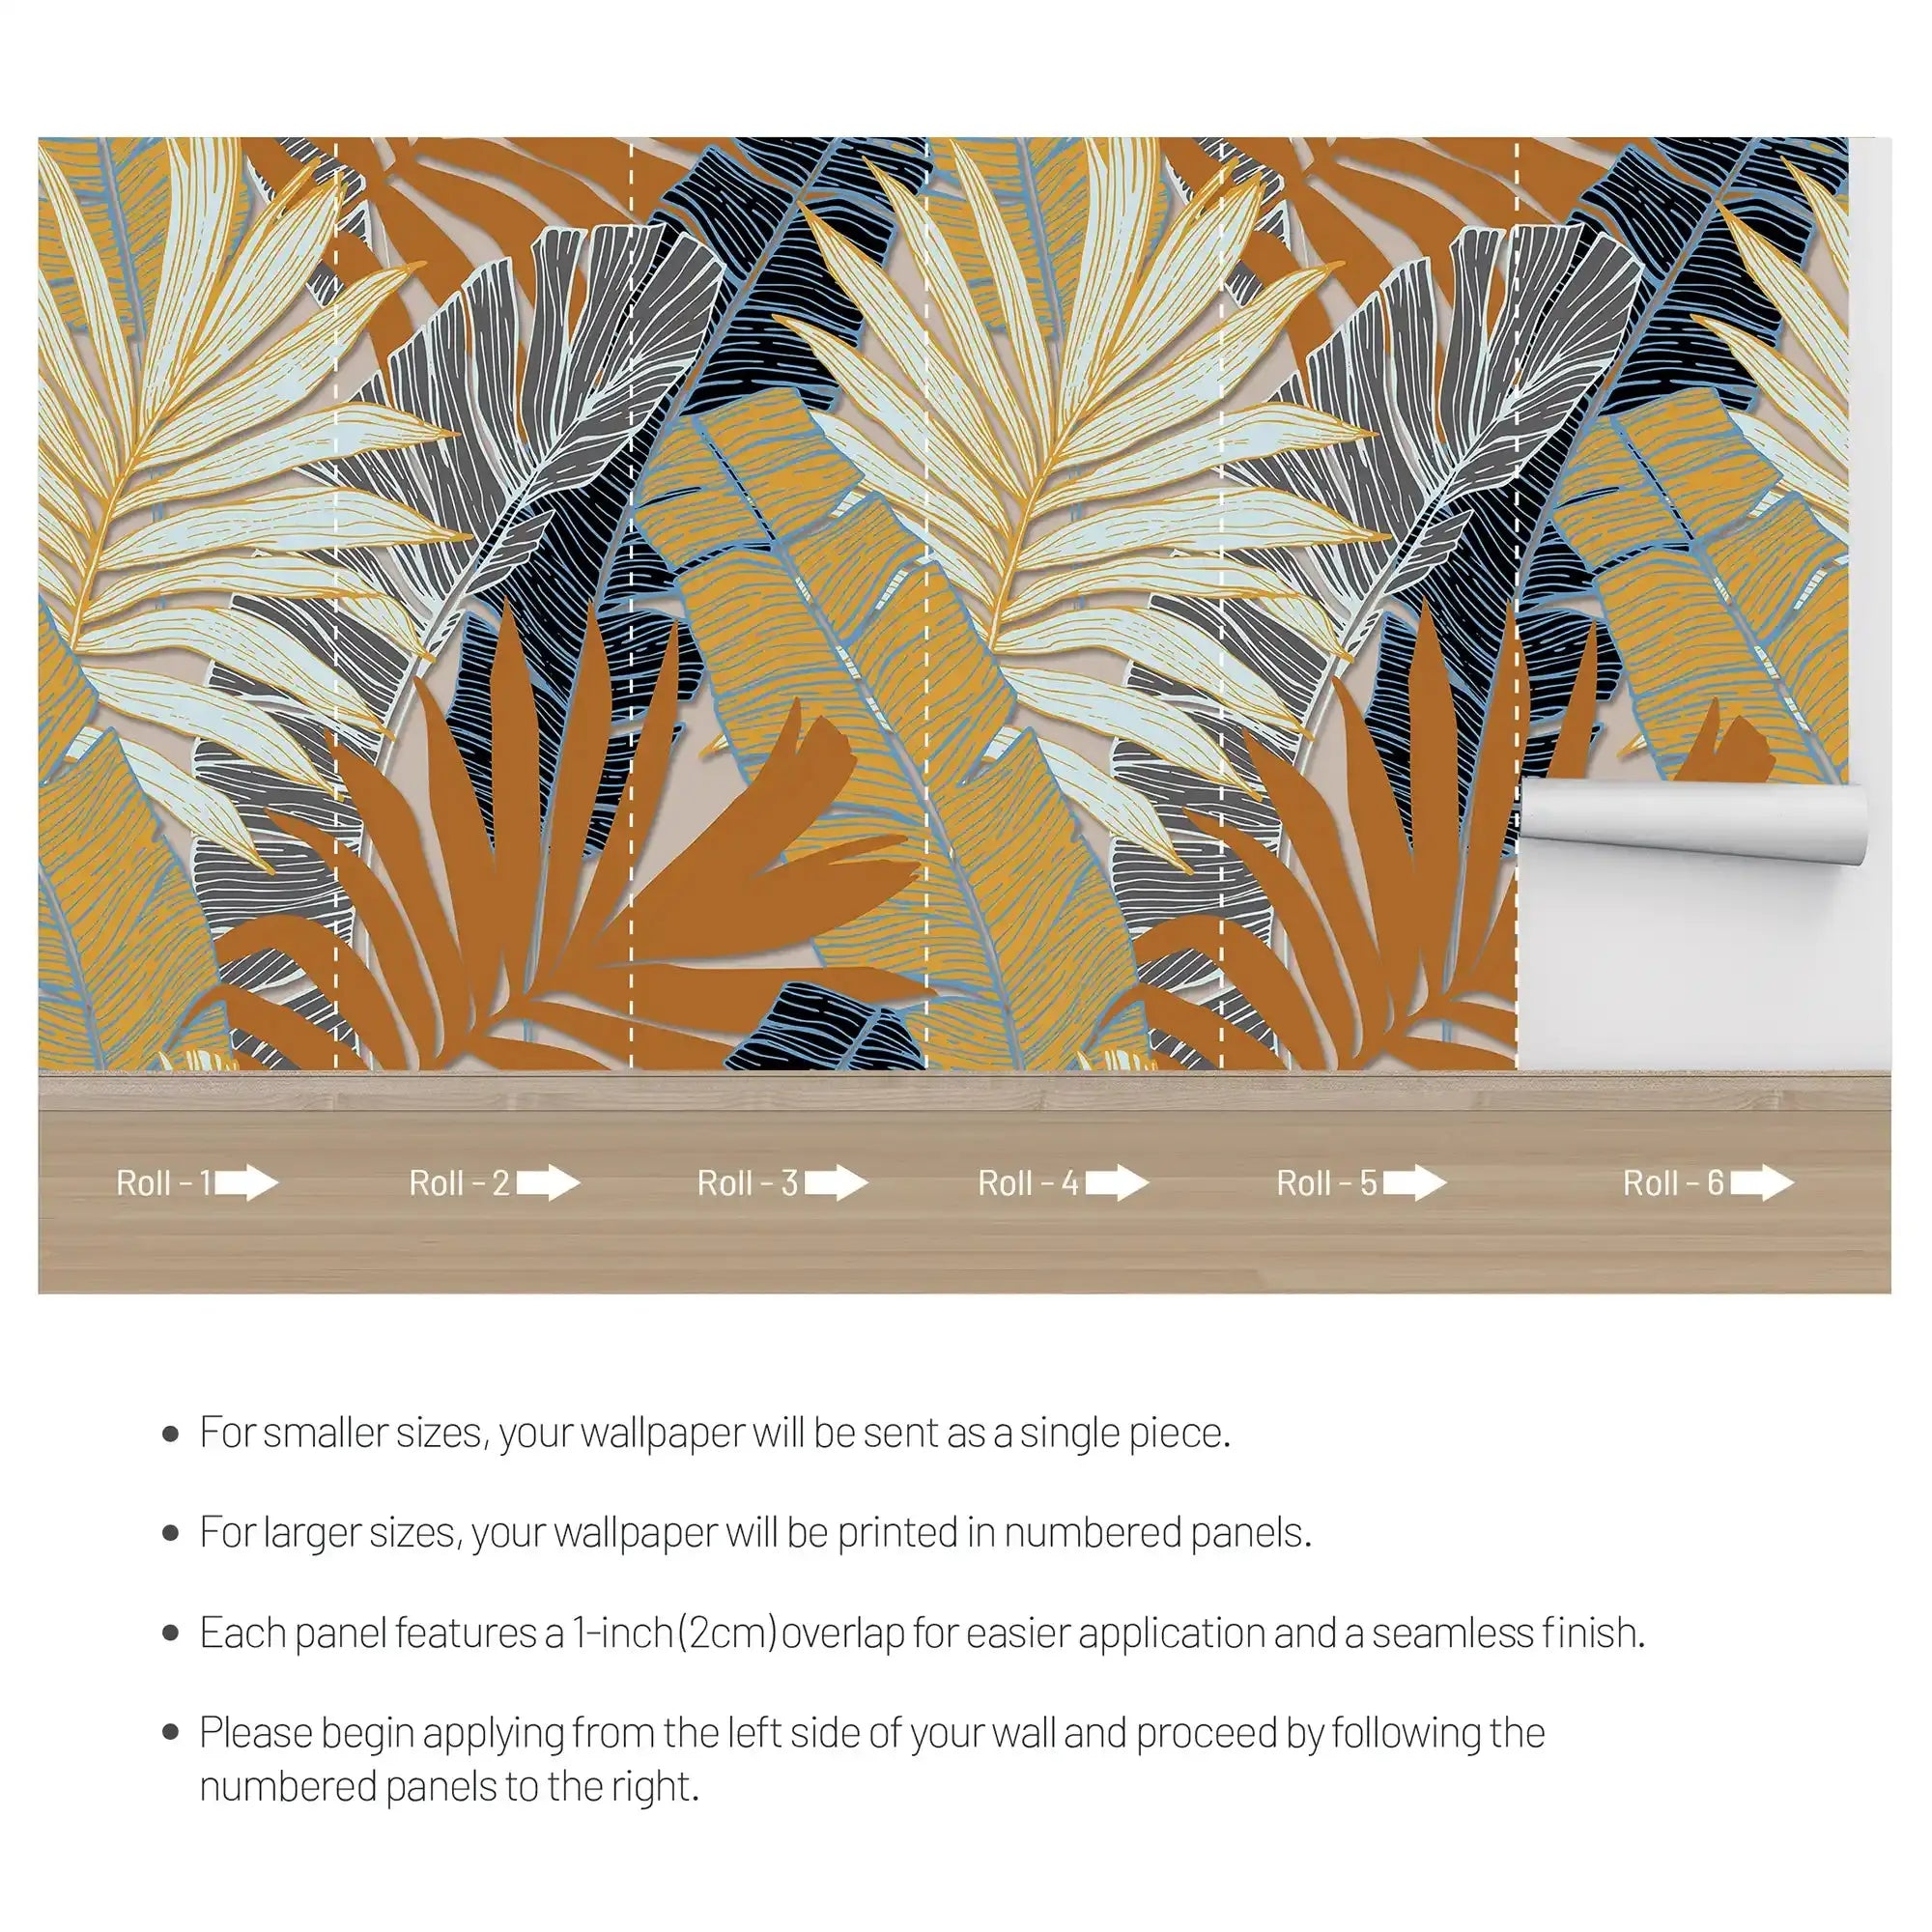 3103-A / Botanical Wall Mural - Self Adhesive, Palm Leaf Tropical Wallpaper for Any Room - Artevella